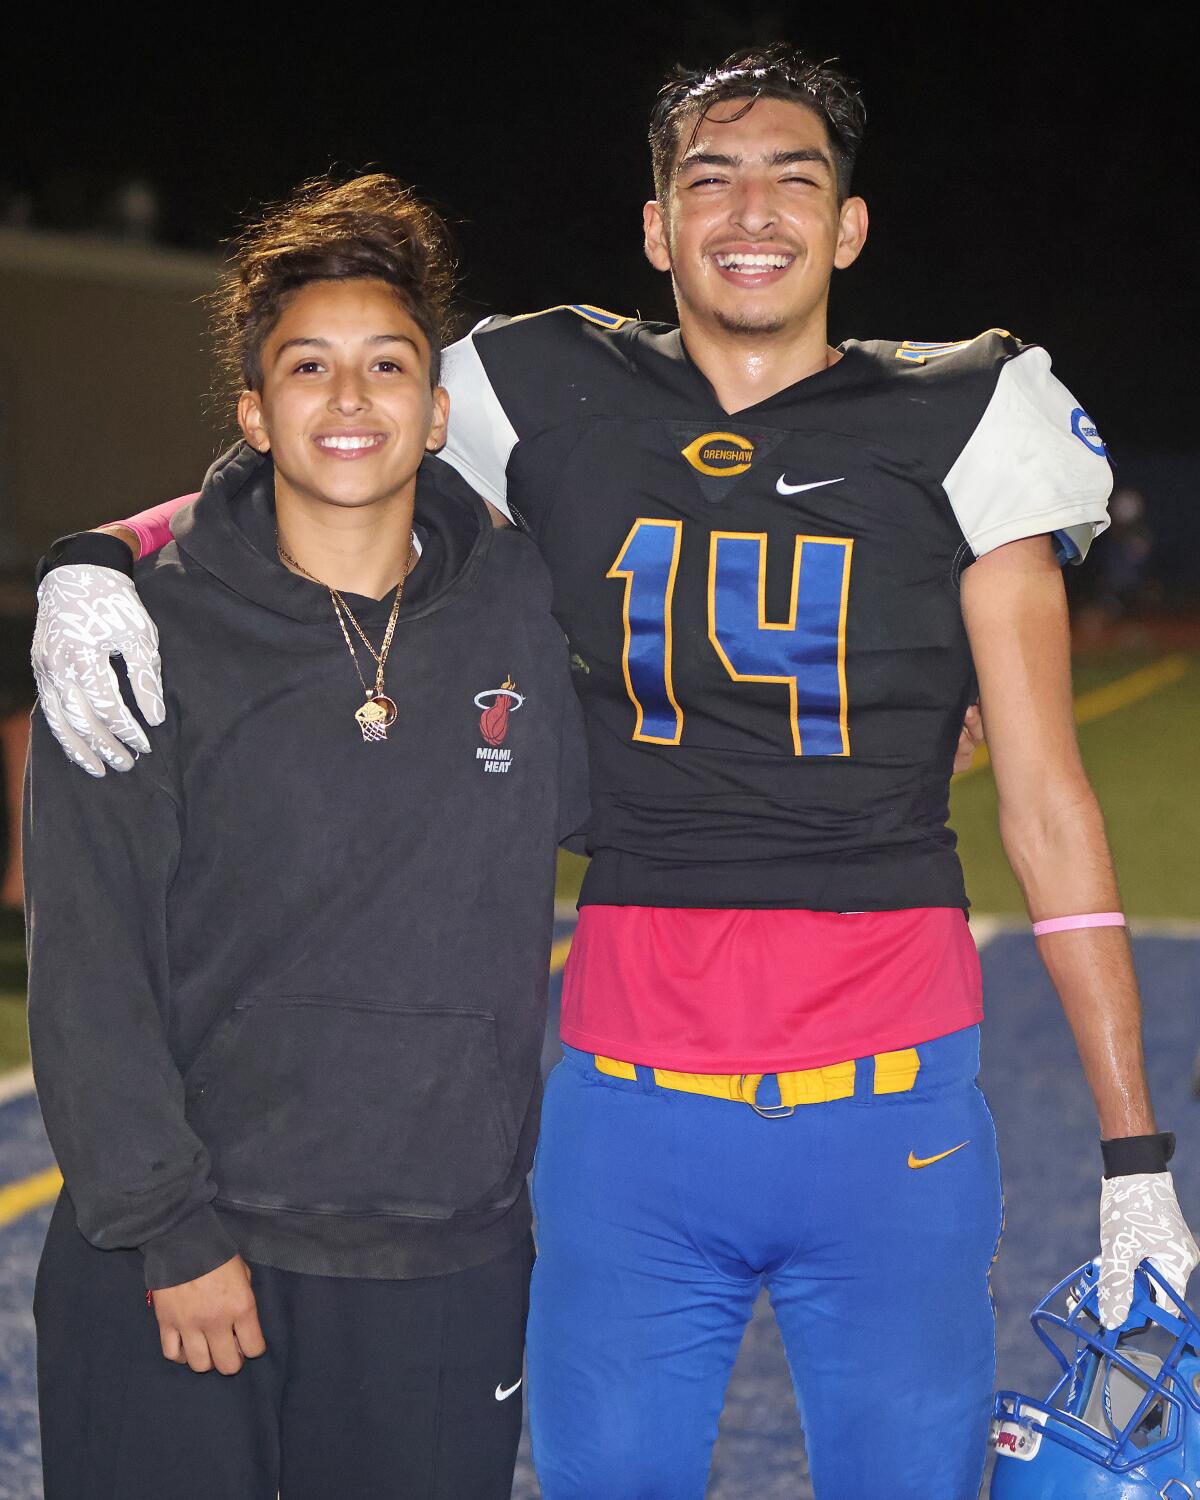 Crenshaw kicker/punter Roberto Salazar celebrates with sister, Citlali, after making game-winning field goal against Dorsey.